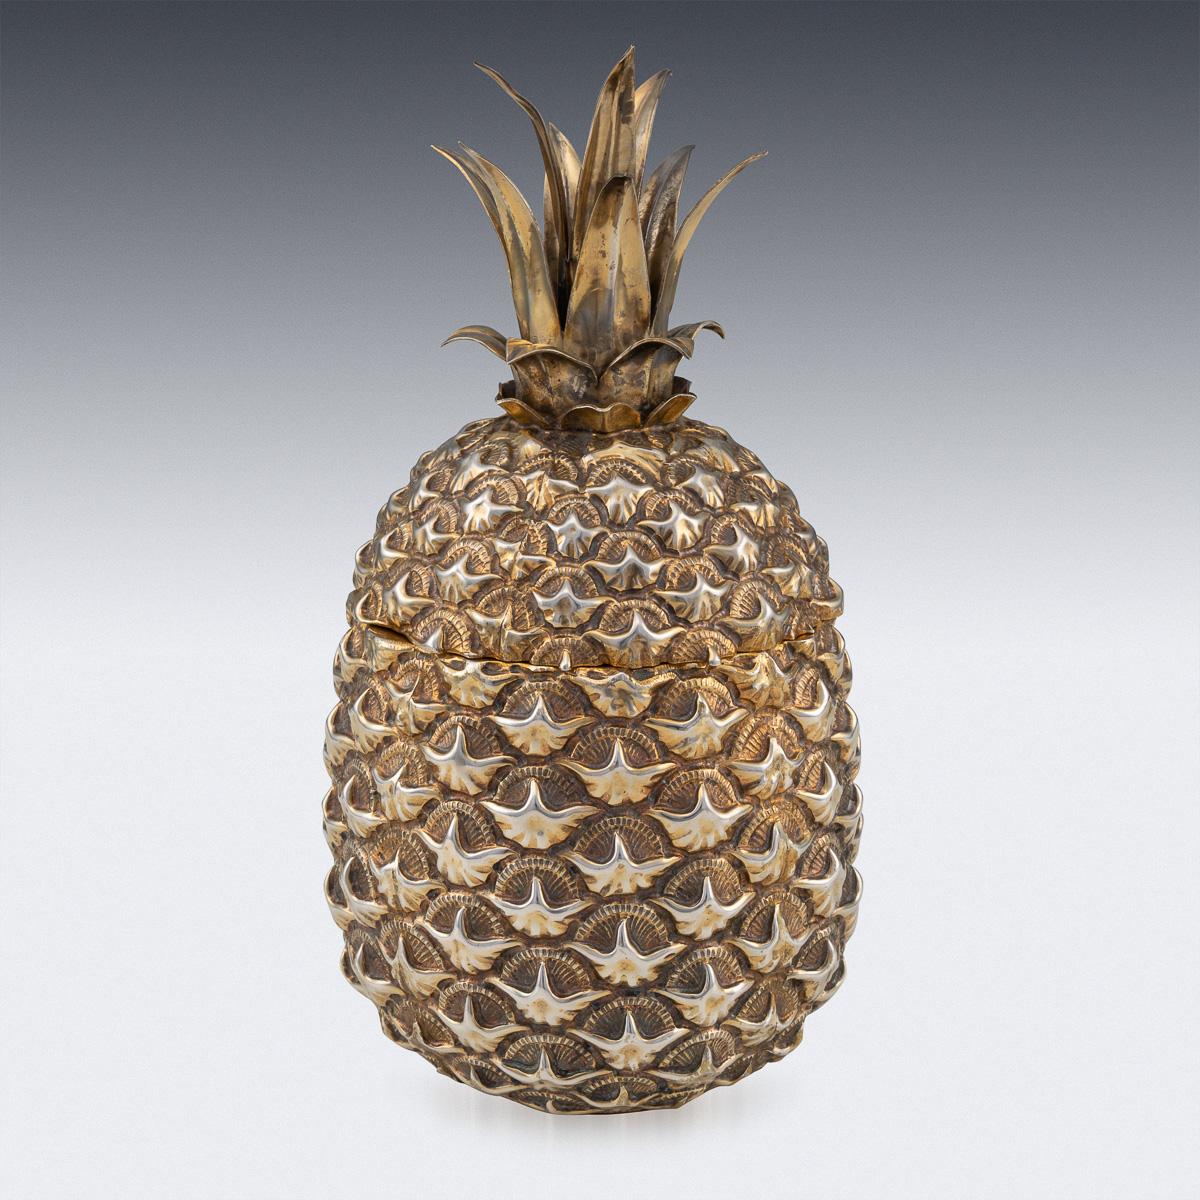 Novelty 20th century Italian solid silver-gilt ice bucket, in a form of a pineapple, removable lid mounted with realistically modelled leaves and richly gilt interior. Hallmarked Italian silver.

Condition

In great condition - No damage, just